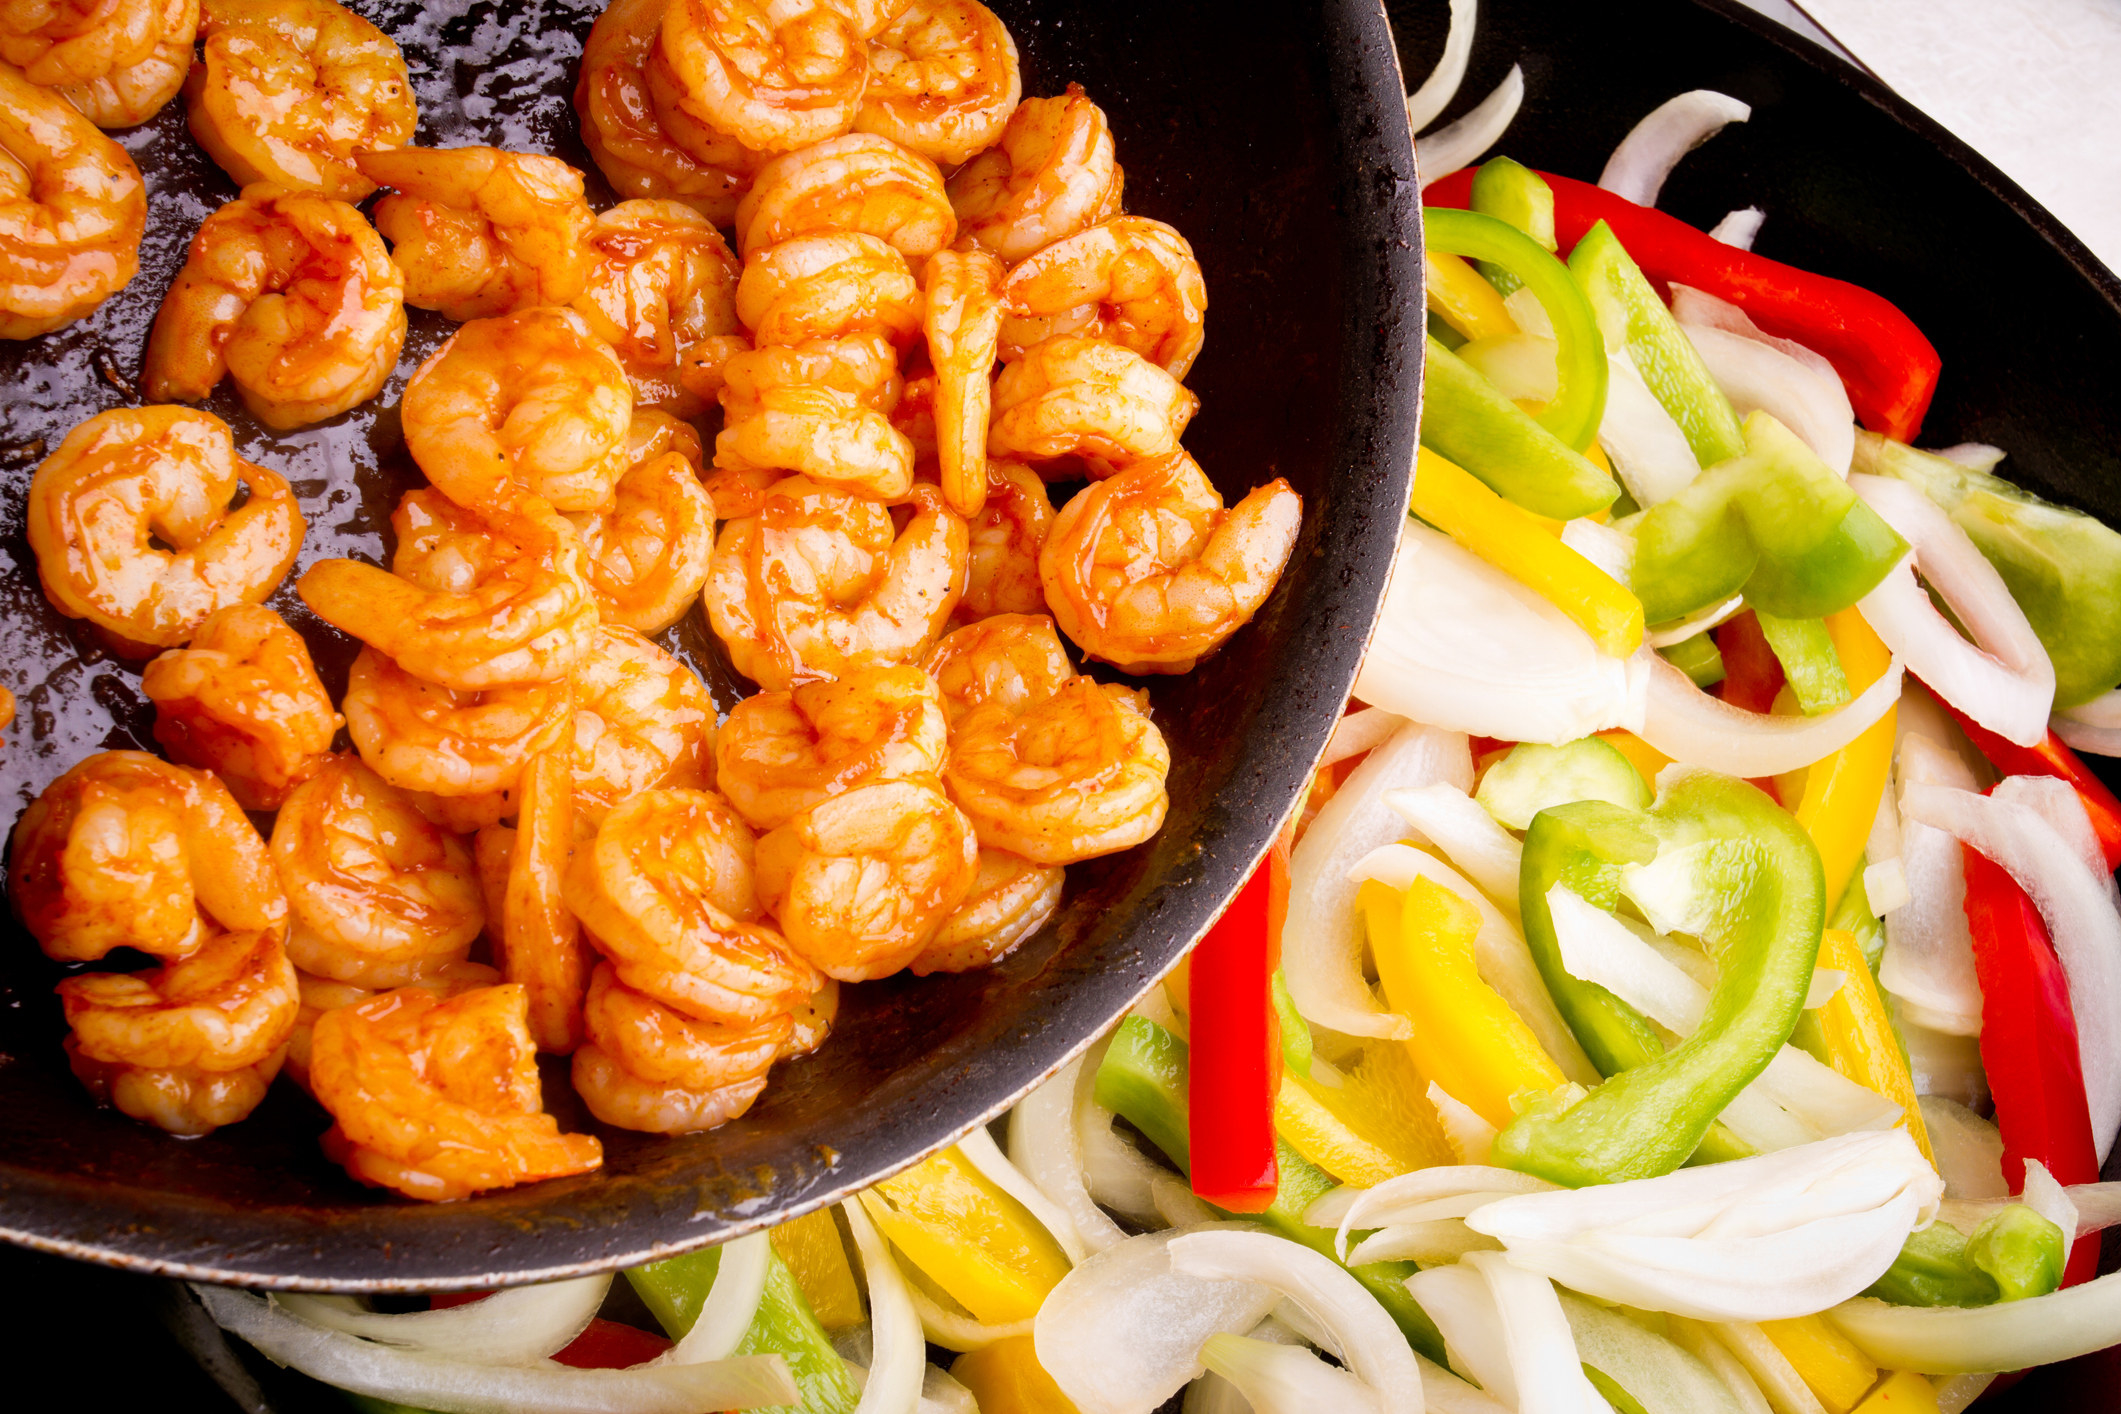 Shrimp Fajitas on a hot skillet with onions, peppers.